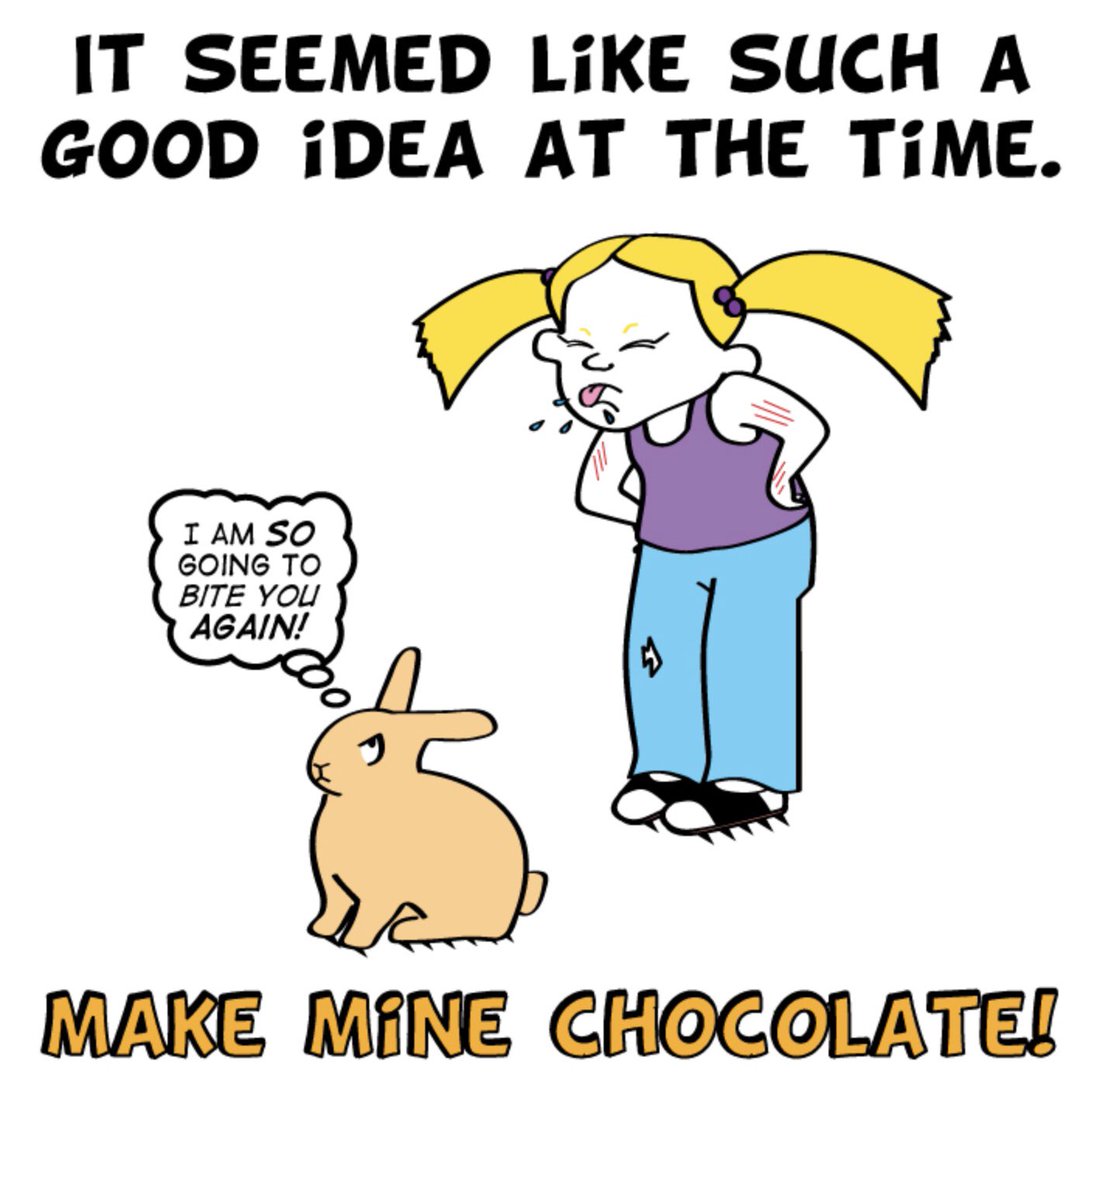 The best Easter bunnies are chocolate. (binkybunny.com thanks makeminechocolate.org)